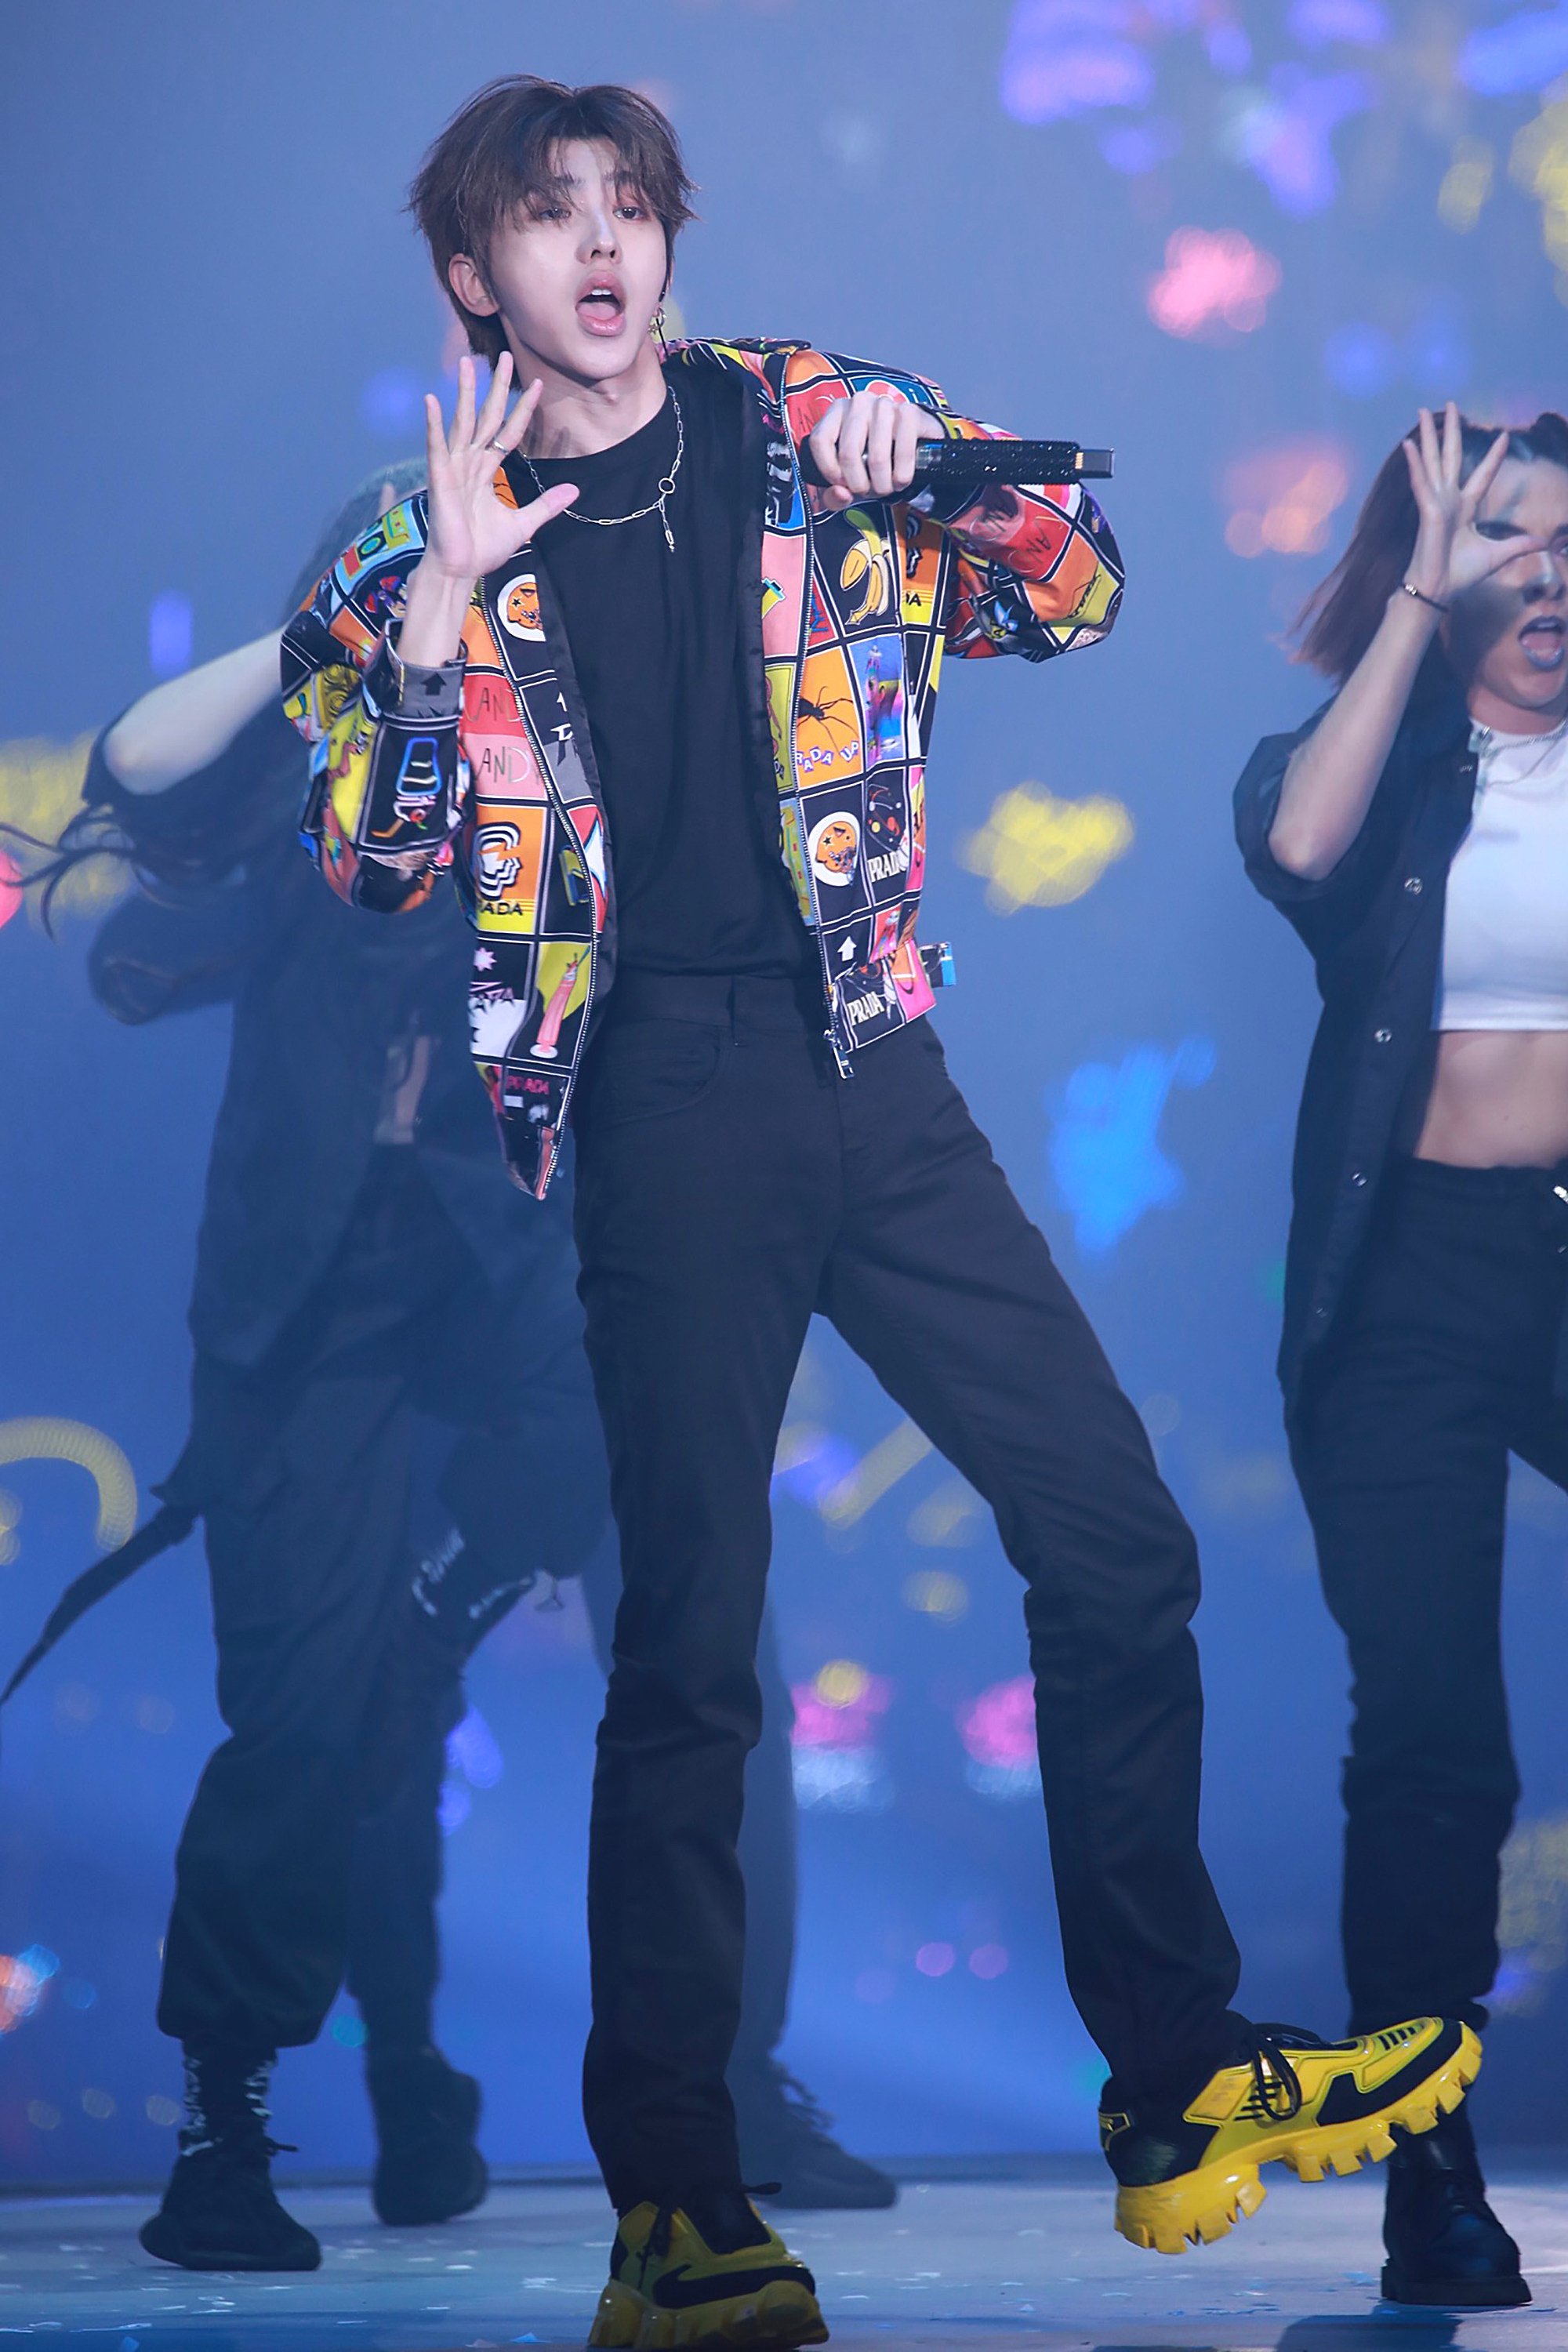 Cai Xukun performs with the Chinese boy group Nine Percent in 2019. He has 38 million followers on social media. Photo: Getty Images